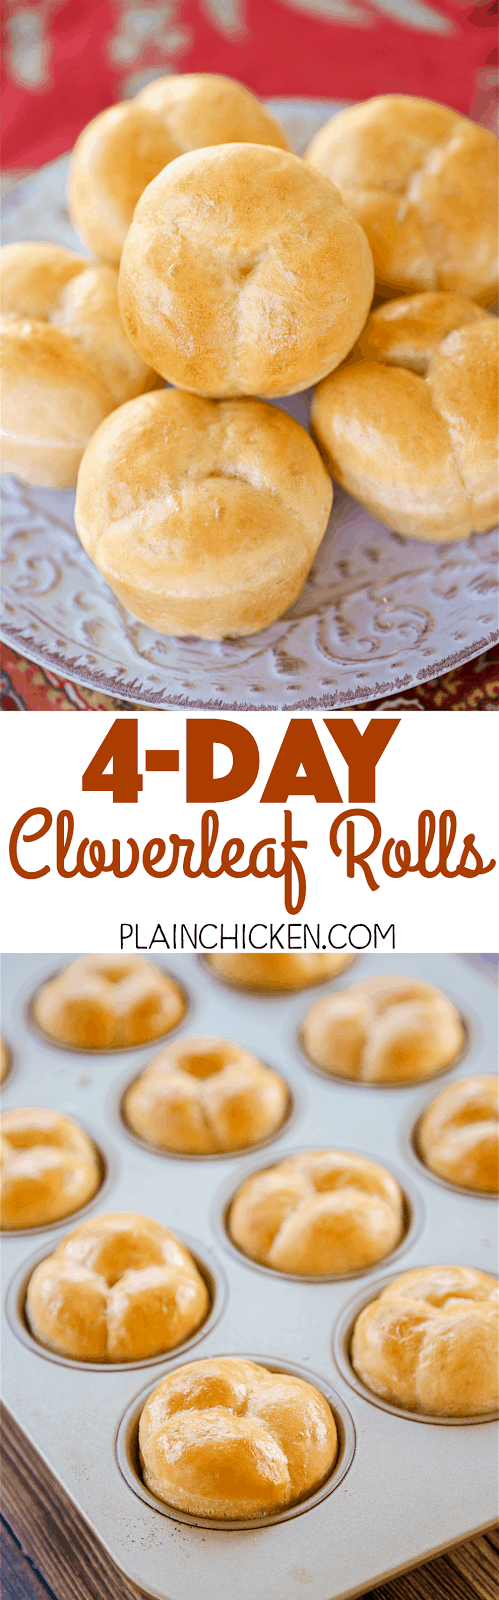 4-Day Cloverleaf Rolls - dough can be made up to 4 days in advance. GREAT timesaver for holiday meal planning!! Yeast, water, sugar, shortening, egg, salt flour and butter. SO delicious! Makes 2 dozen rolls, perfect for the big holiday meal and leftovers!!